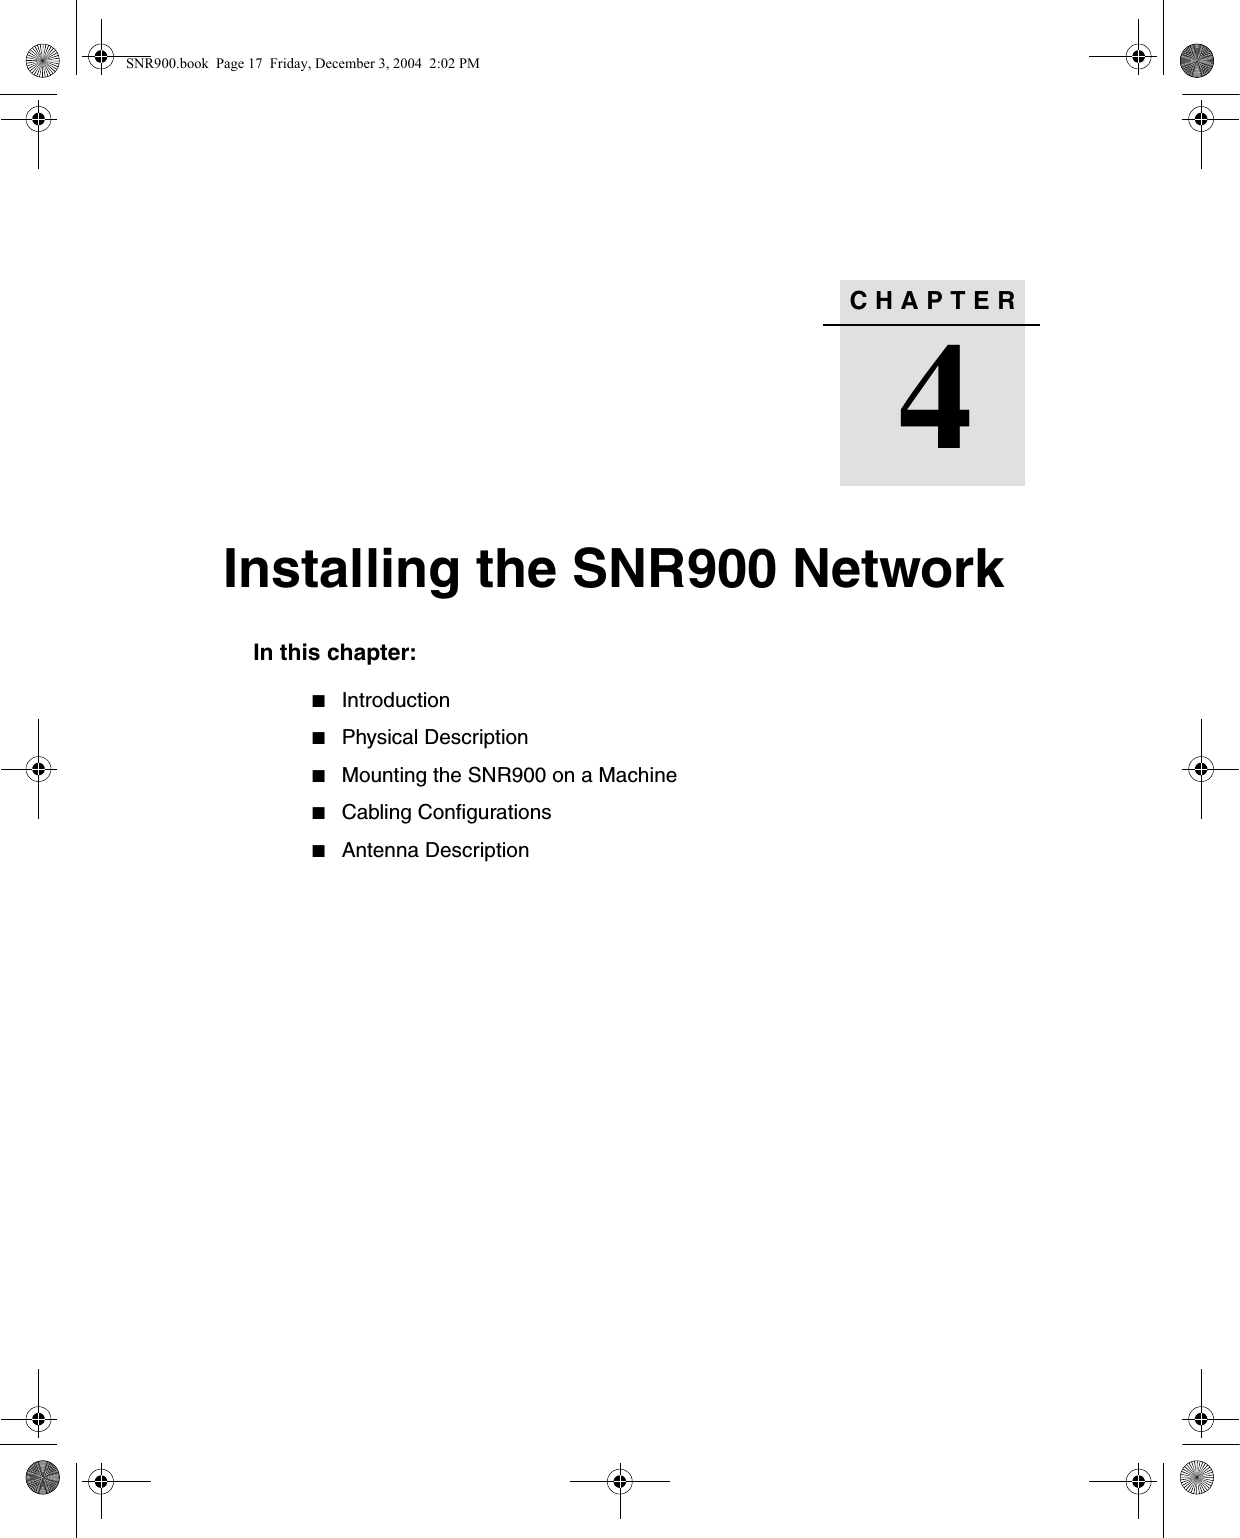 CHAPTER4Installing the SNR900 Network4In this chapter:QIntroductionQPhysical DescriptionQMounting the SNR900 on a MachineQCabling ConfigurationsQAntenna DescriptionSNR900.book  Page 17  Friday, December 3, 2004  2:02 PM